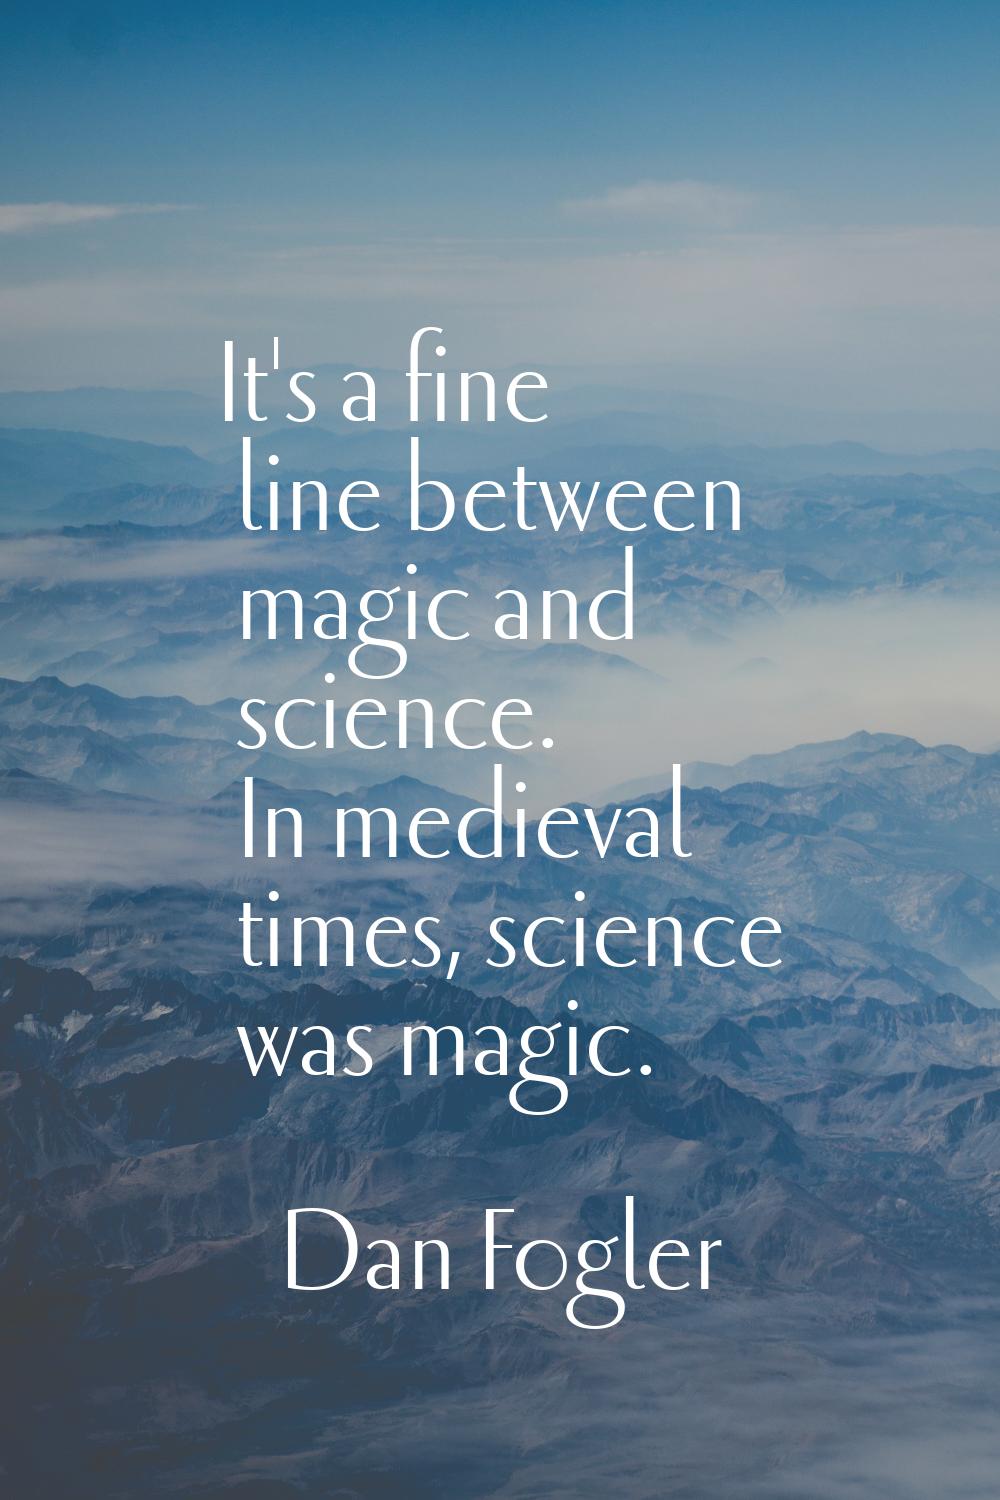 It's a fine line between magic and science. In medieval times, science was magic.